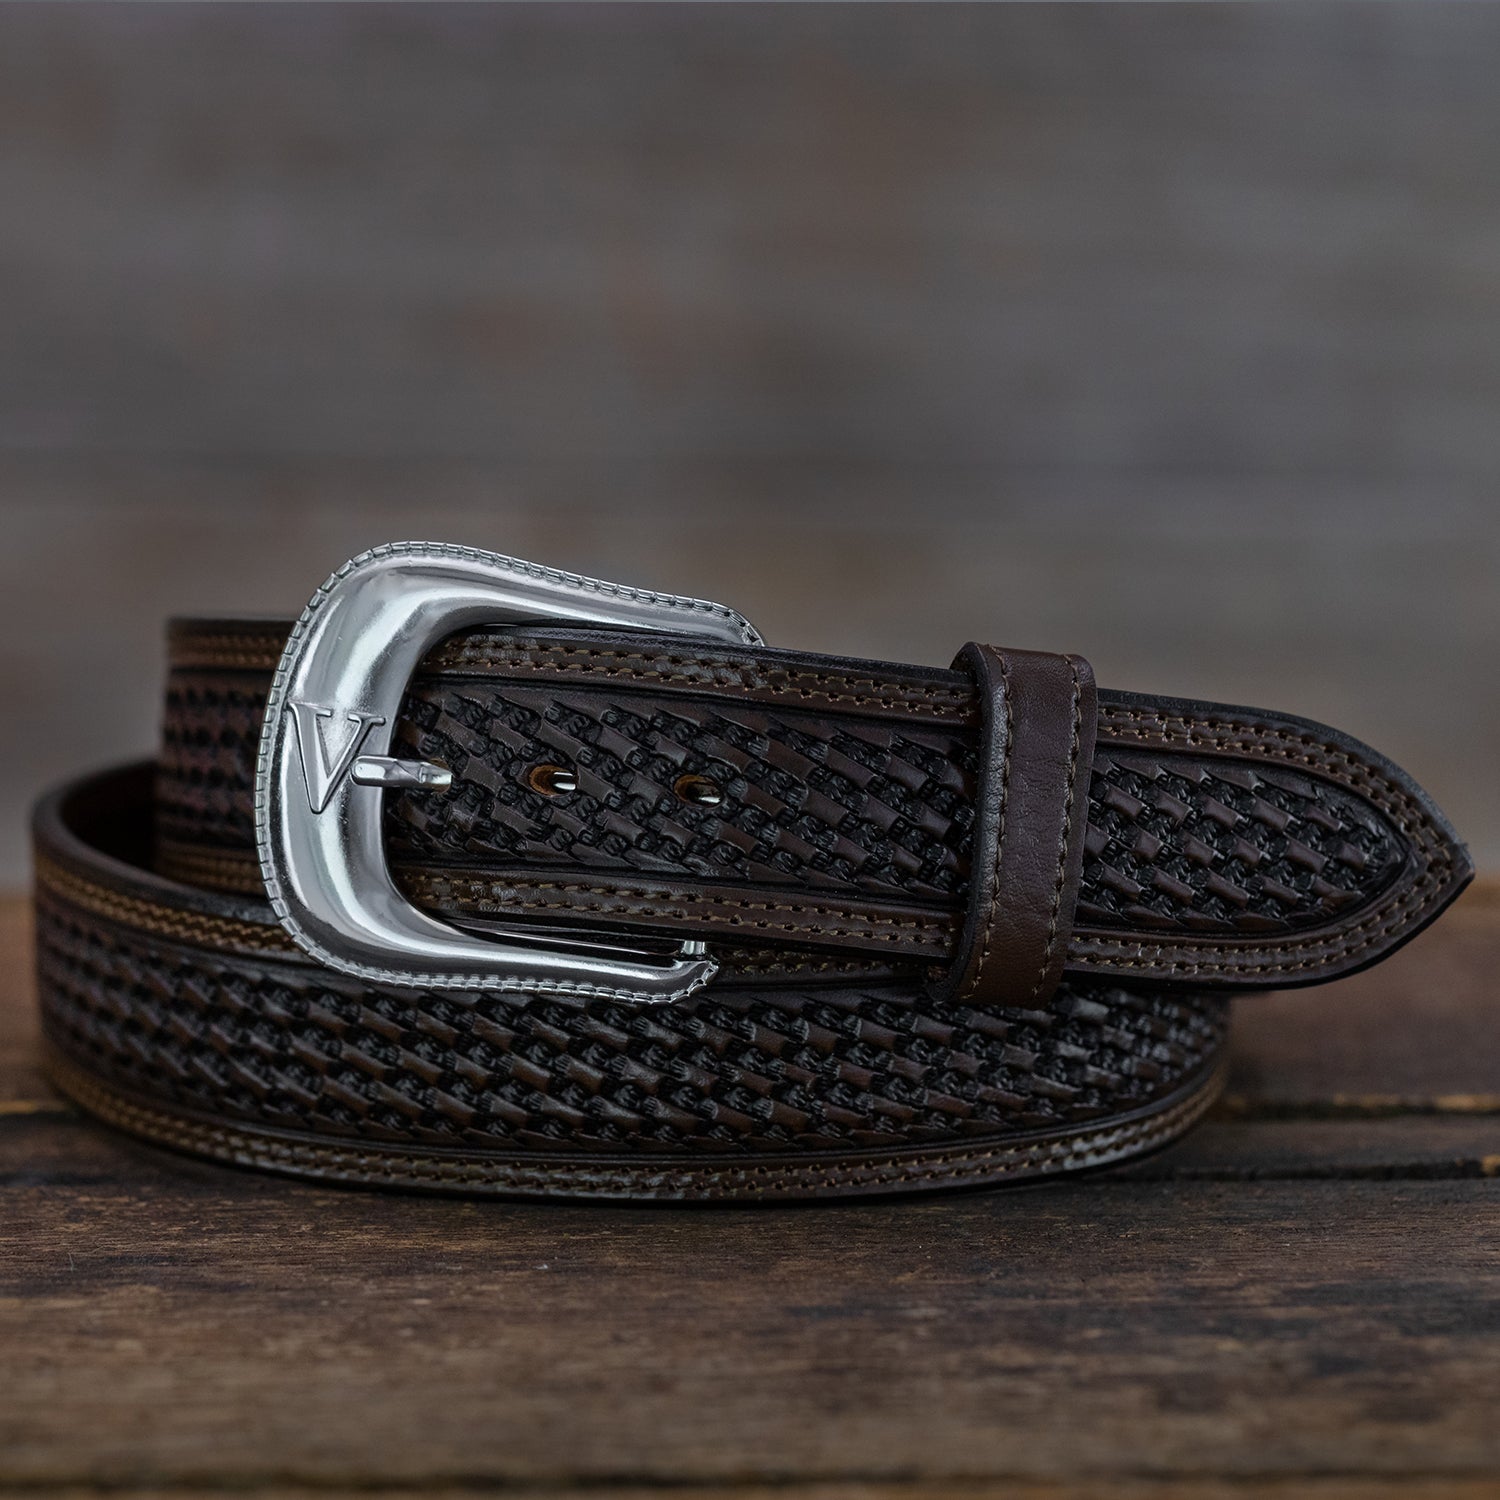 Multi Black, Grey and Silver - Woven Stretch Belt - Stolen Riches